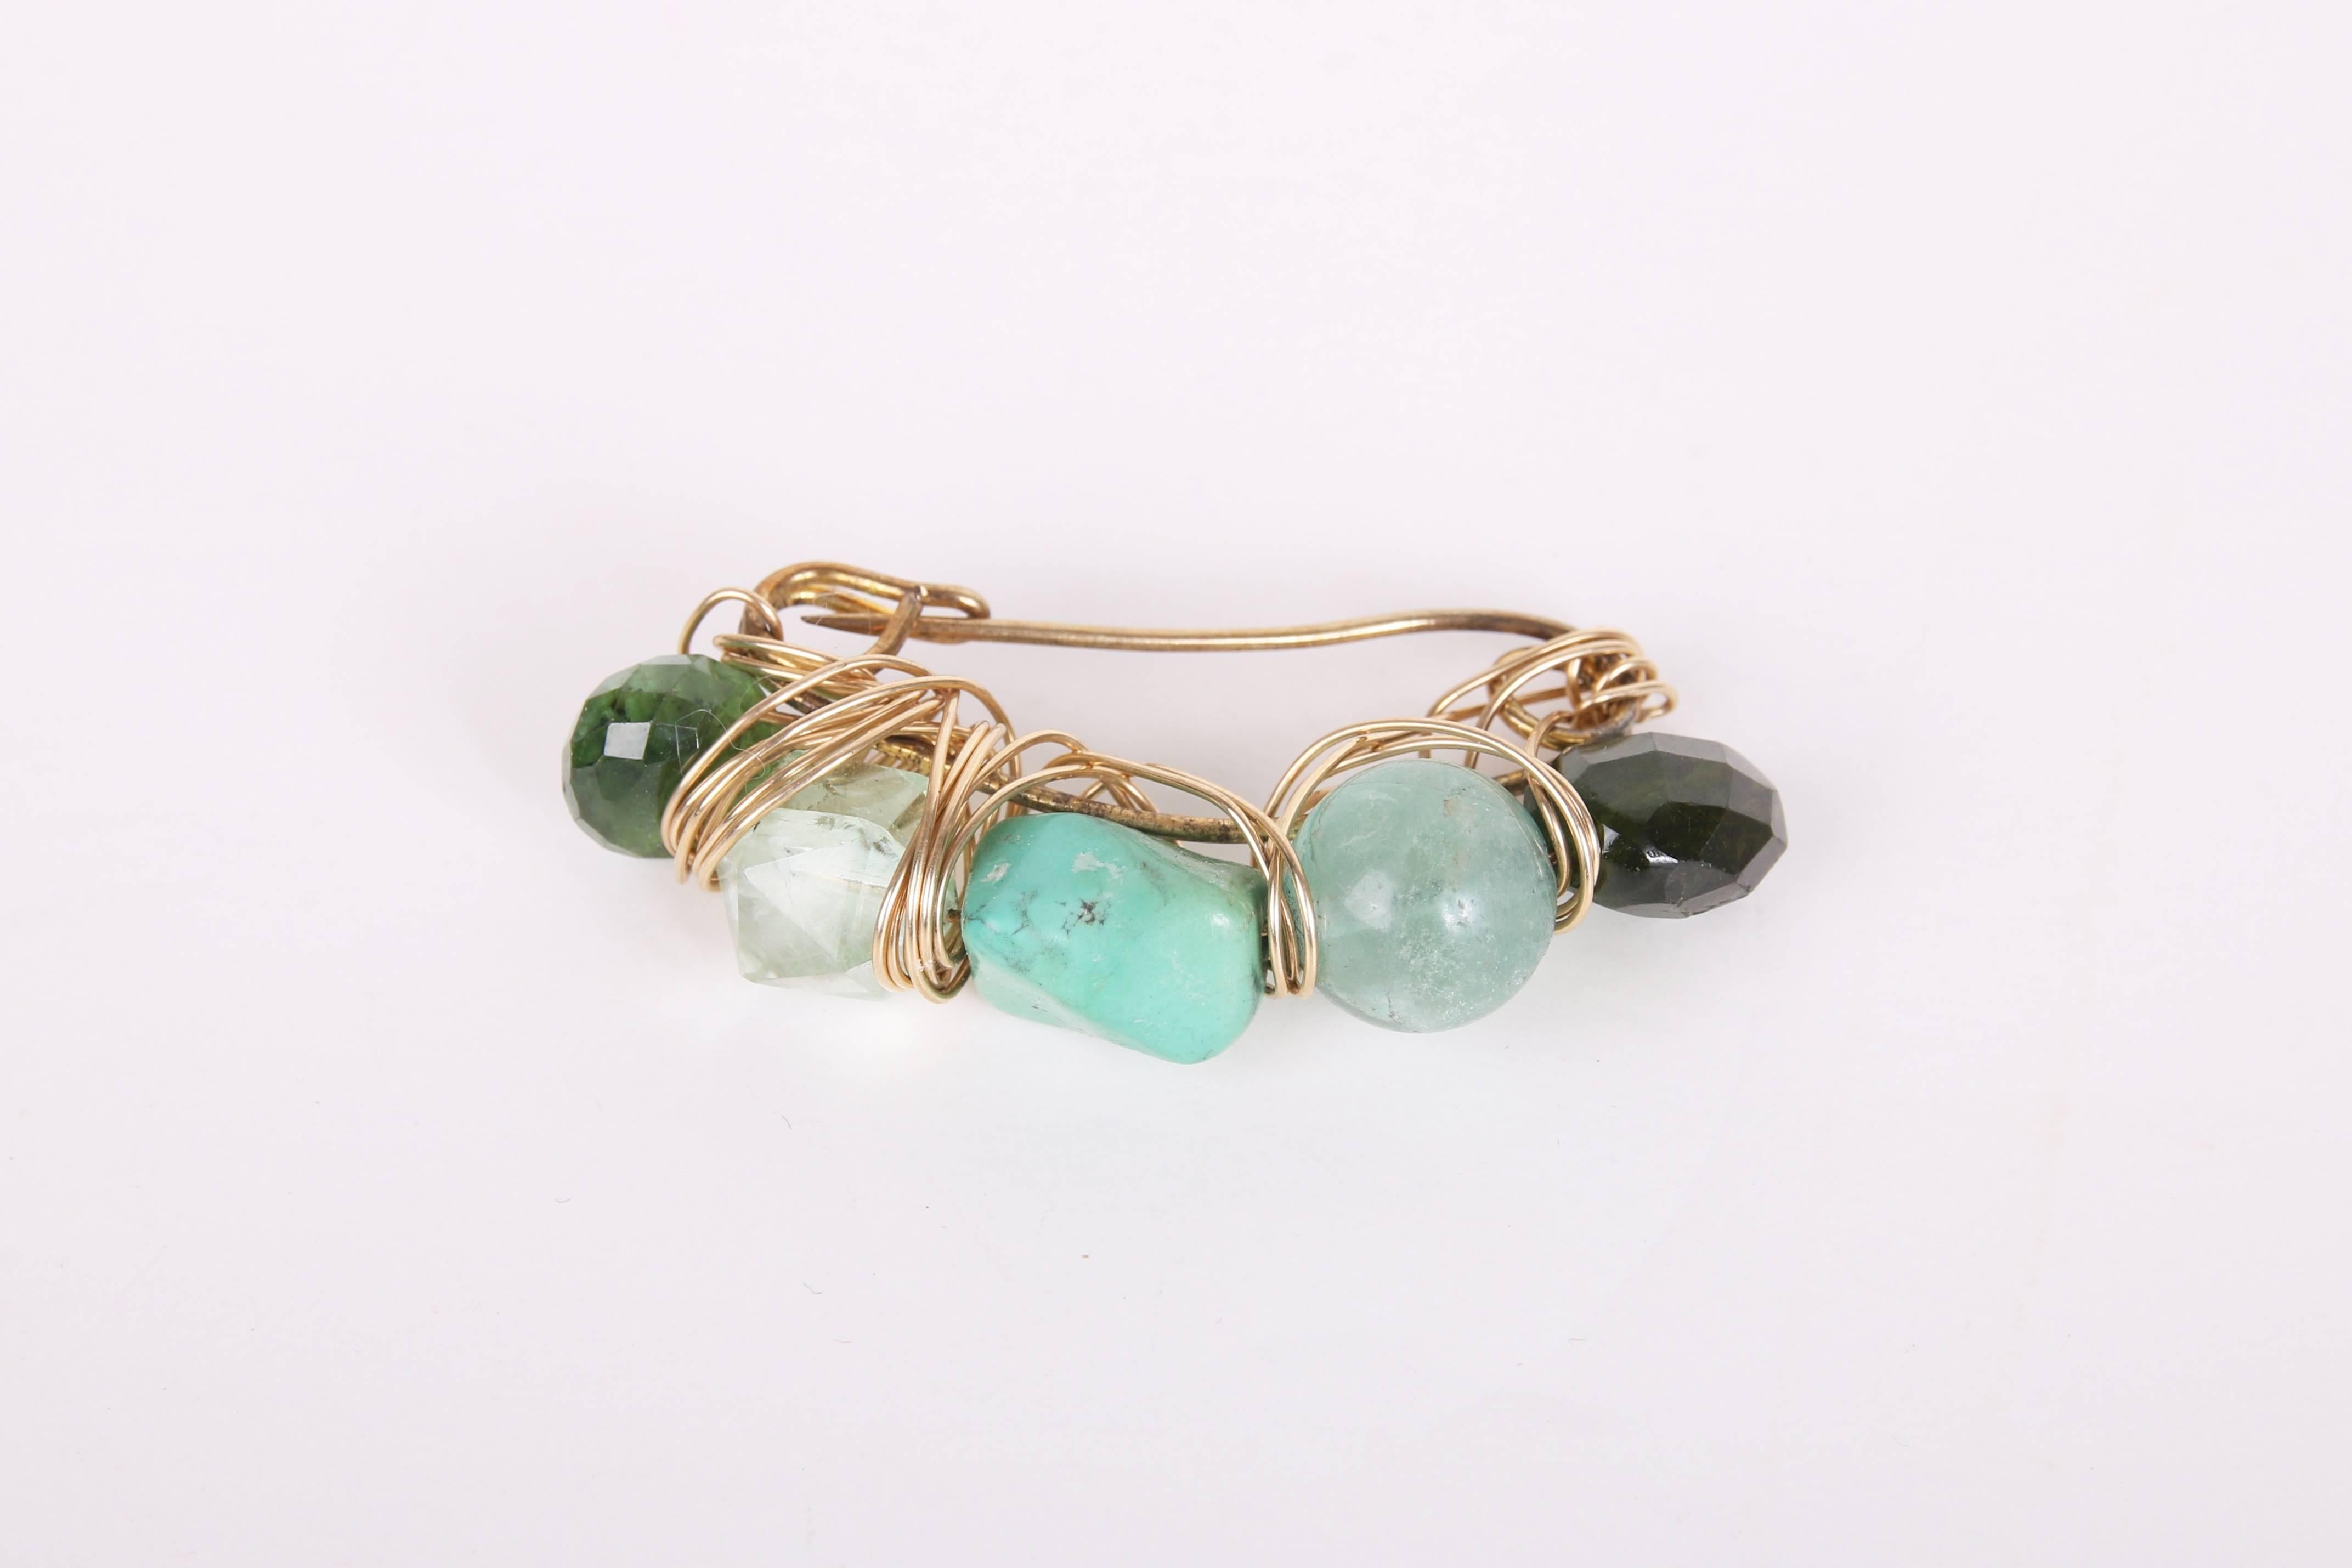 Kazuko 14k gold wire wrapped brooch made from semi-precious gemstone beads on a safety pin. Each of the five beads appear to be a different kind of stone - while all in the green/blue family. And in a variety of finishes - faceted, smooth, tumbled,